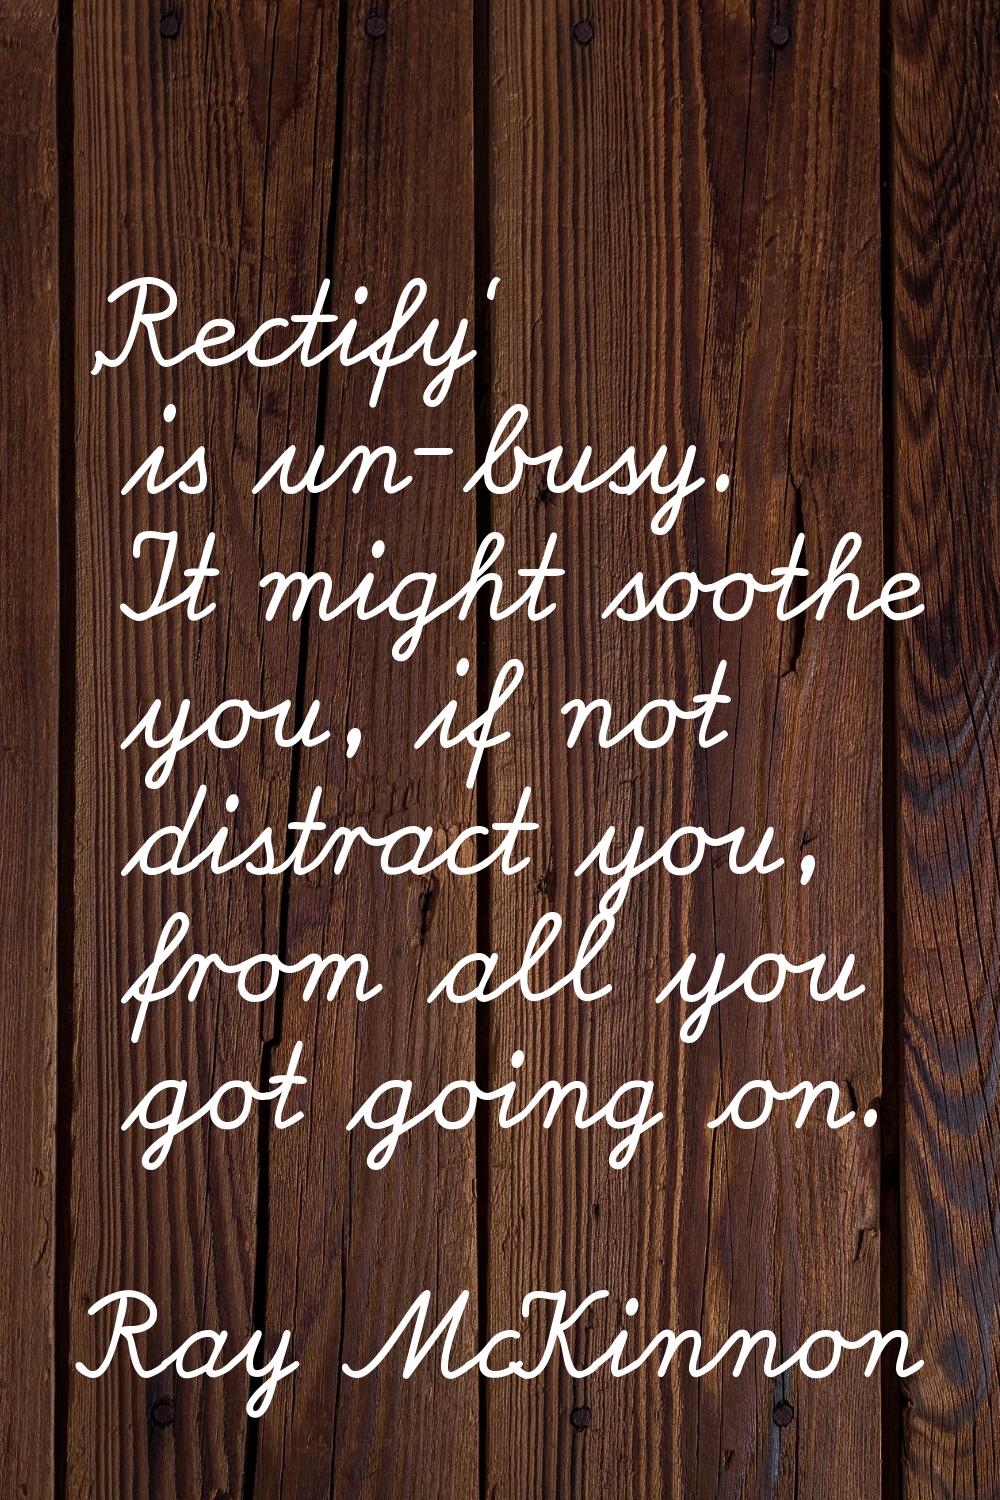 'Rectify' is un-busy. It might soothe you, if not distract you, from all you got going on.